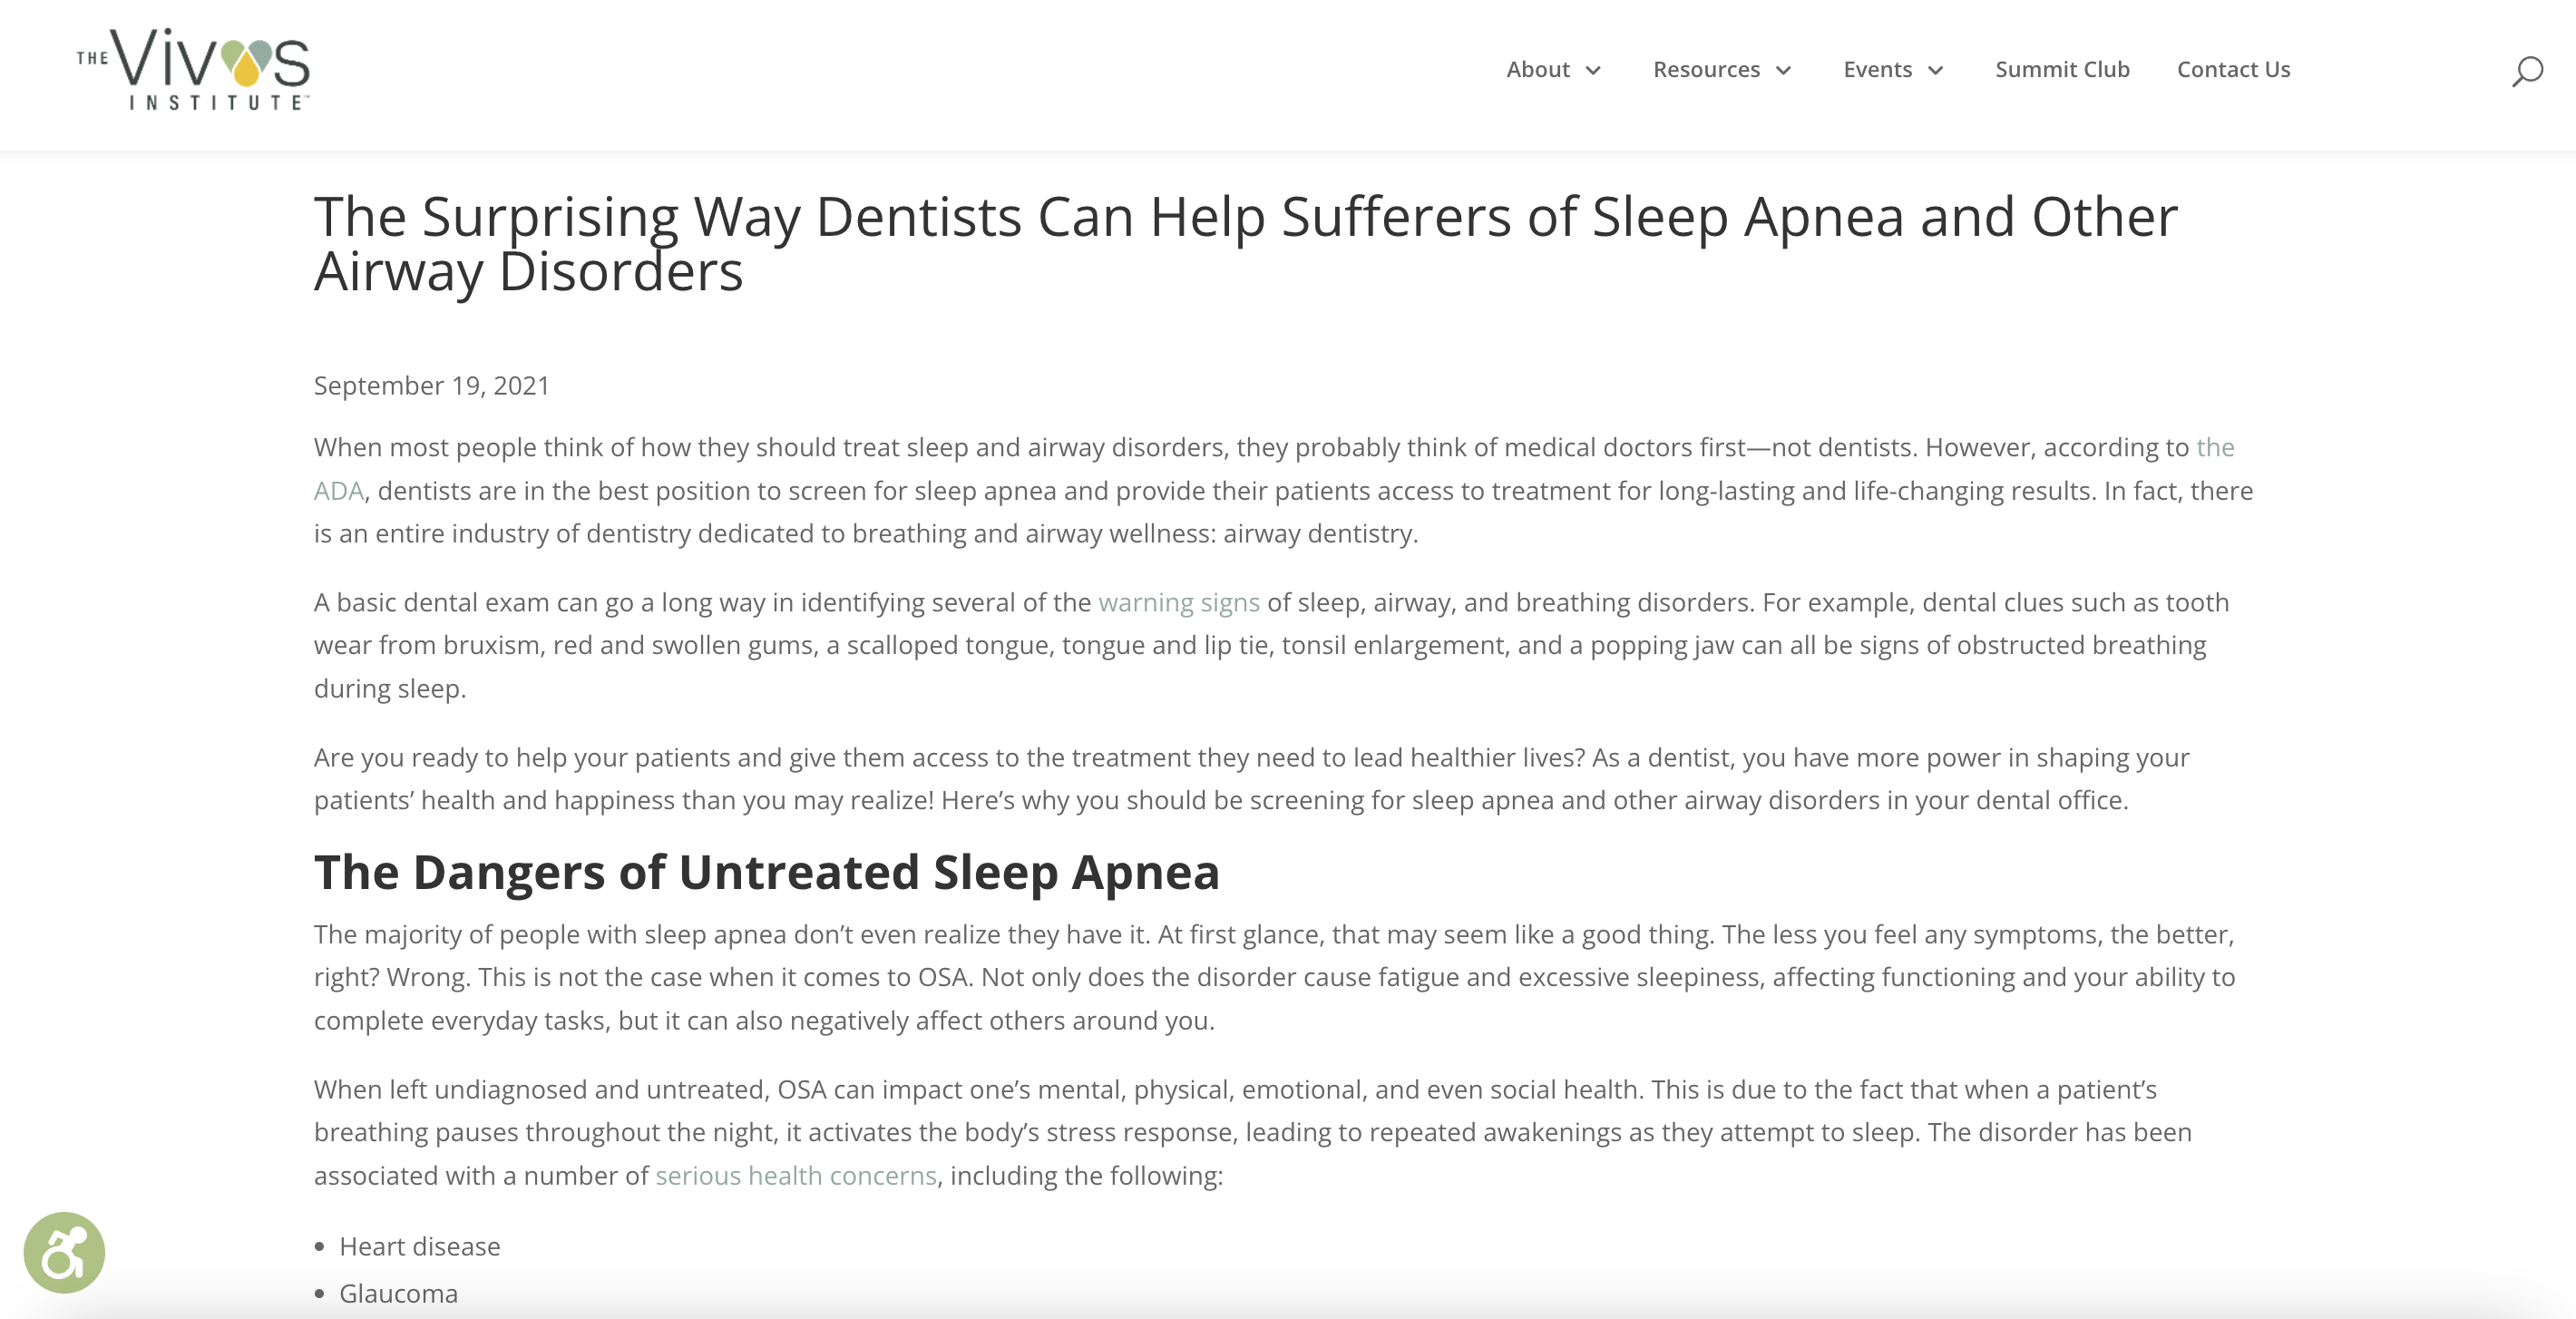 The Surprising Way Dentists Can Help Sufferers of Sleep Apnea and Other Airway Disorders